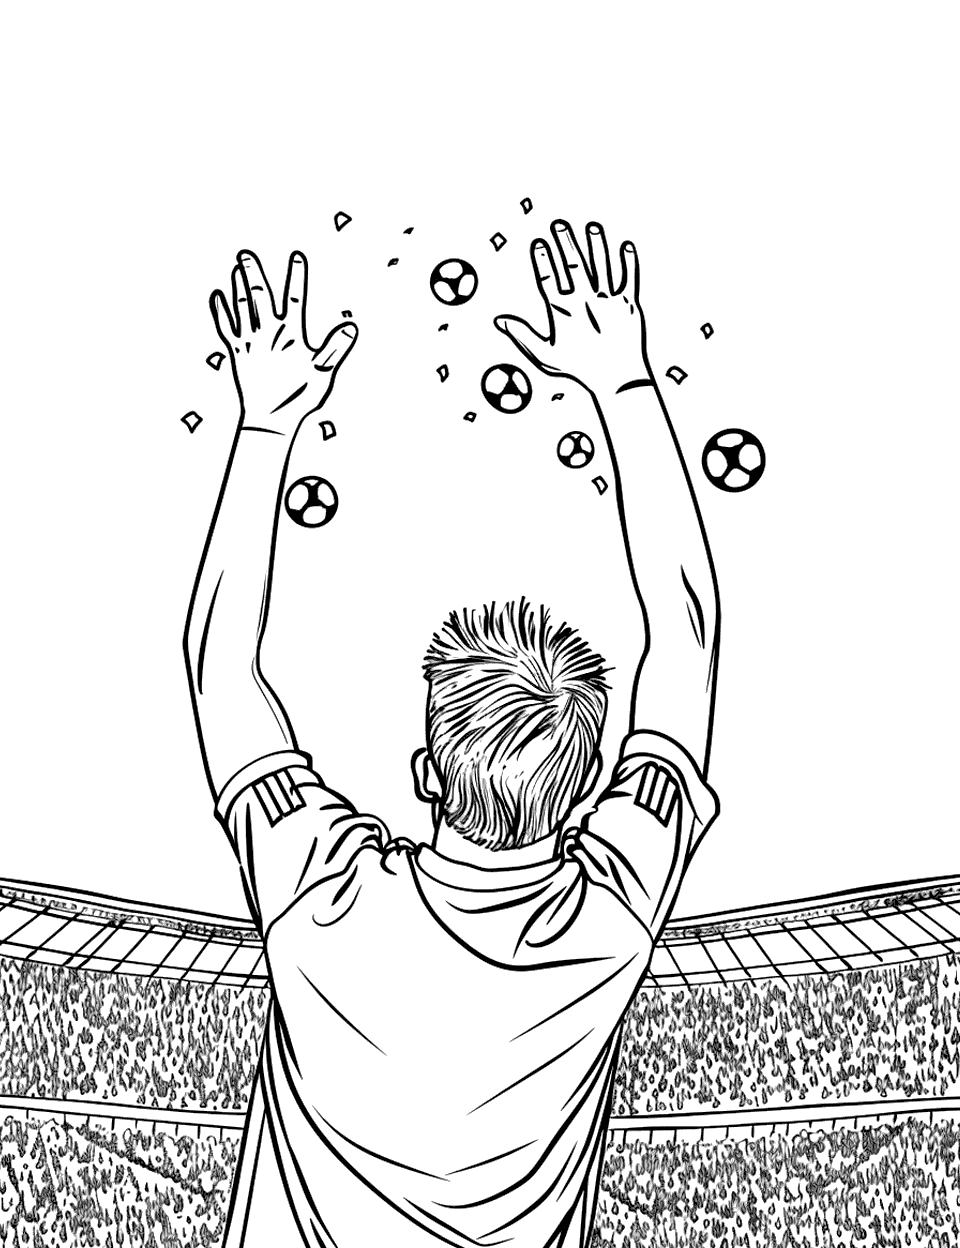 Victory Lap Soccer Coloring Page - Player doing a victory lap around the stadium, waving to the fans.